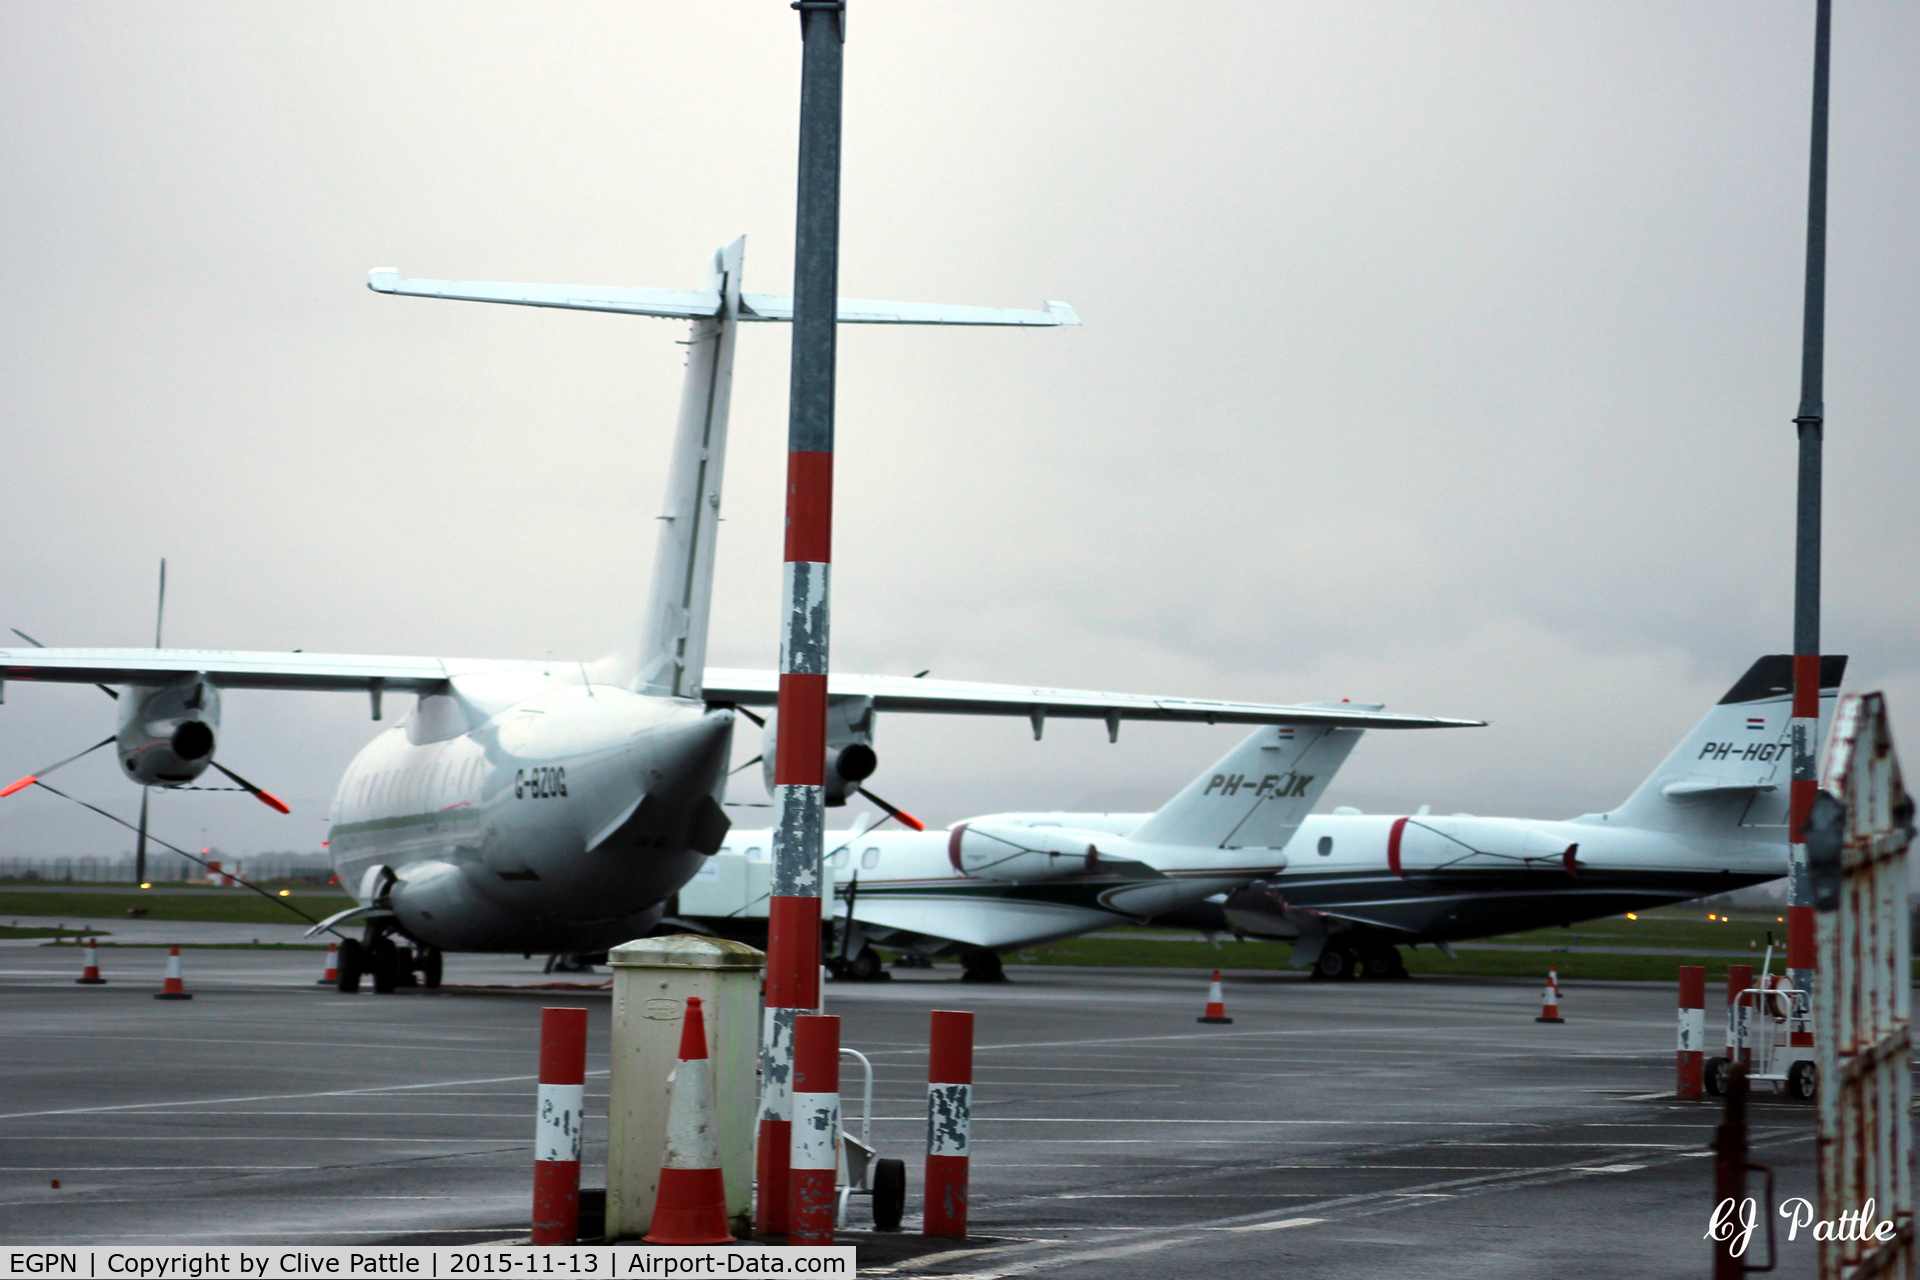 Dundee Airport, Dundee, Scotland United Kingdom (EGPN) - A fairly busy ramp view at Dundee Riverside Airport EGPN